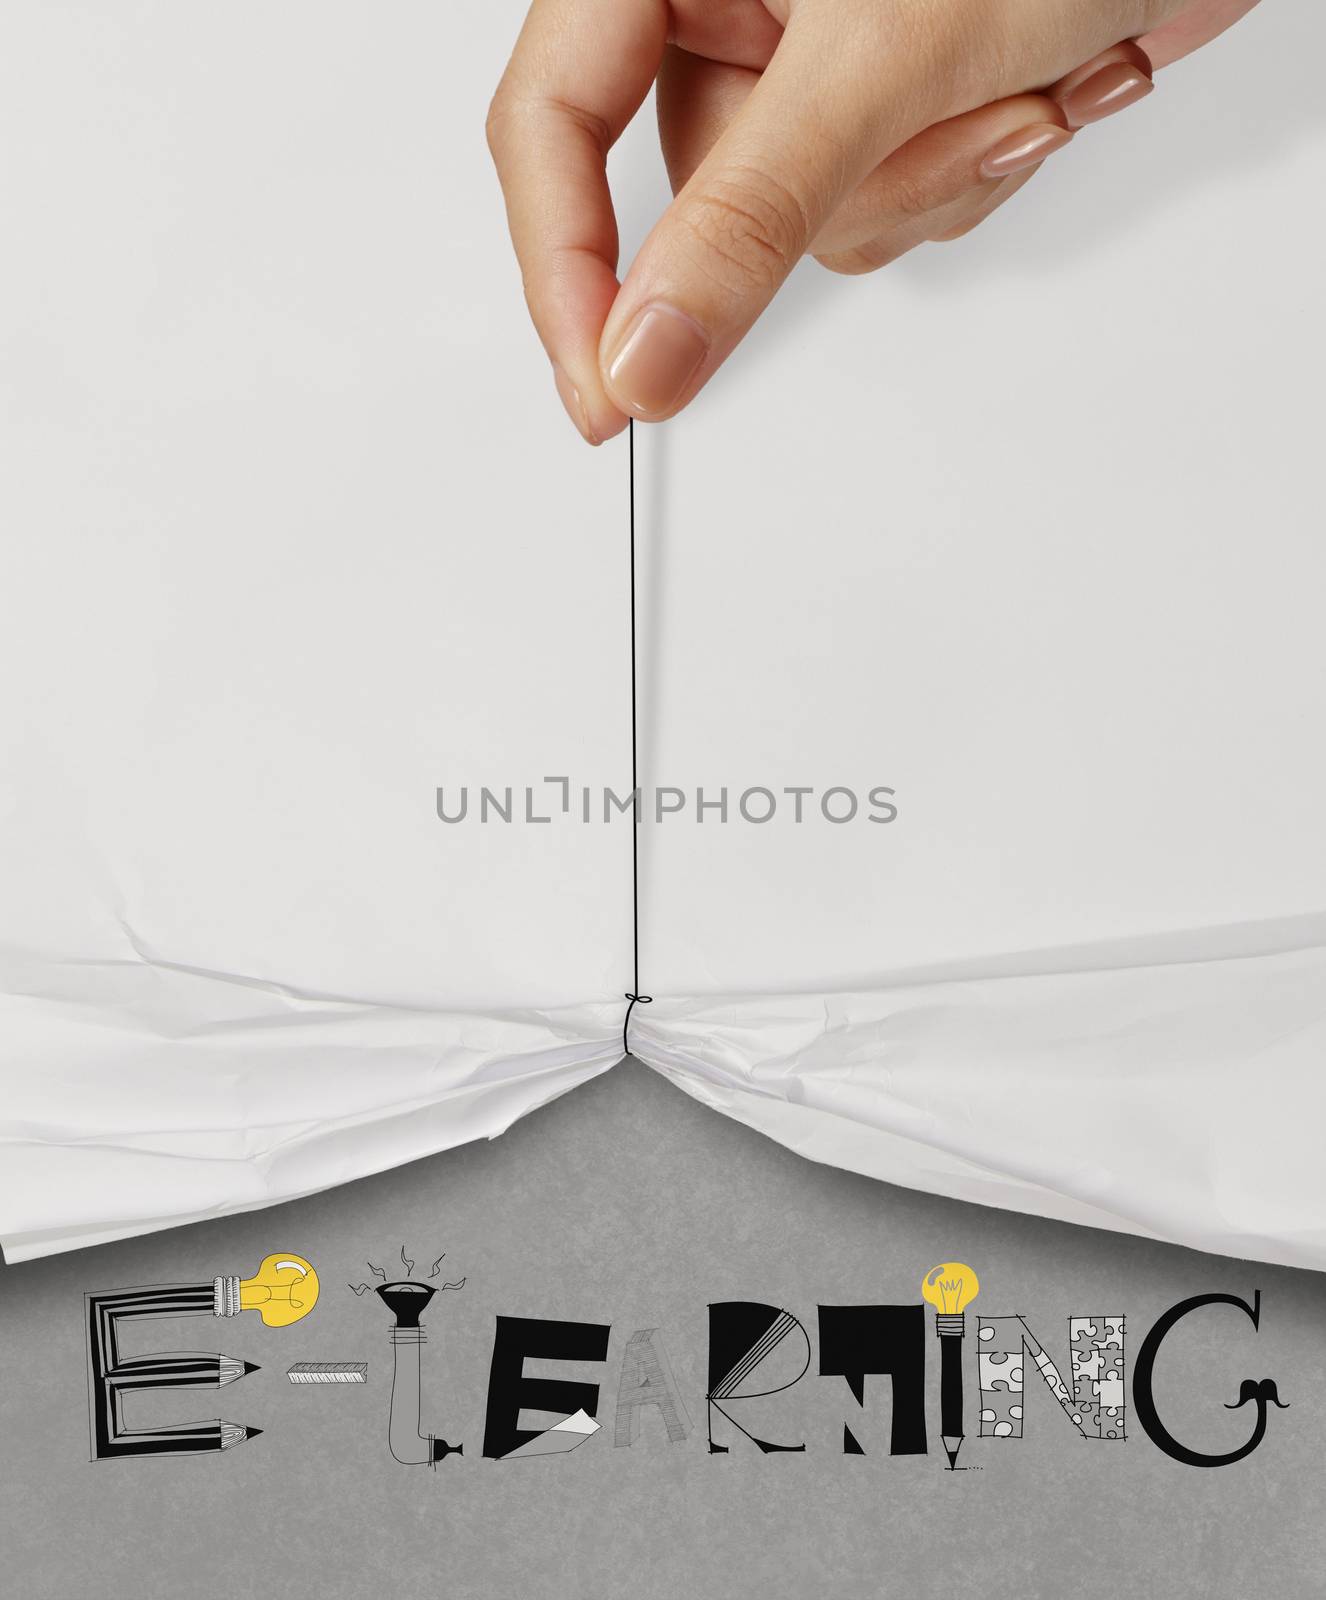 business hand pull rope open wrinkled paper show E-LEARNING design text as concept